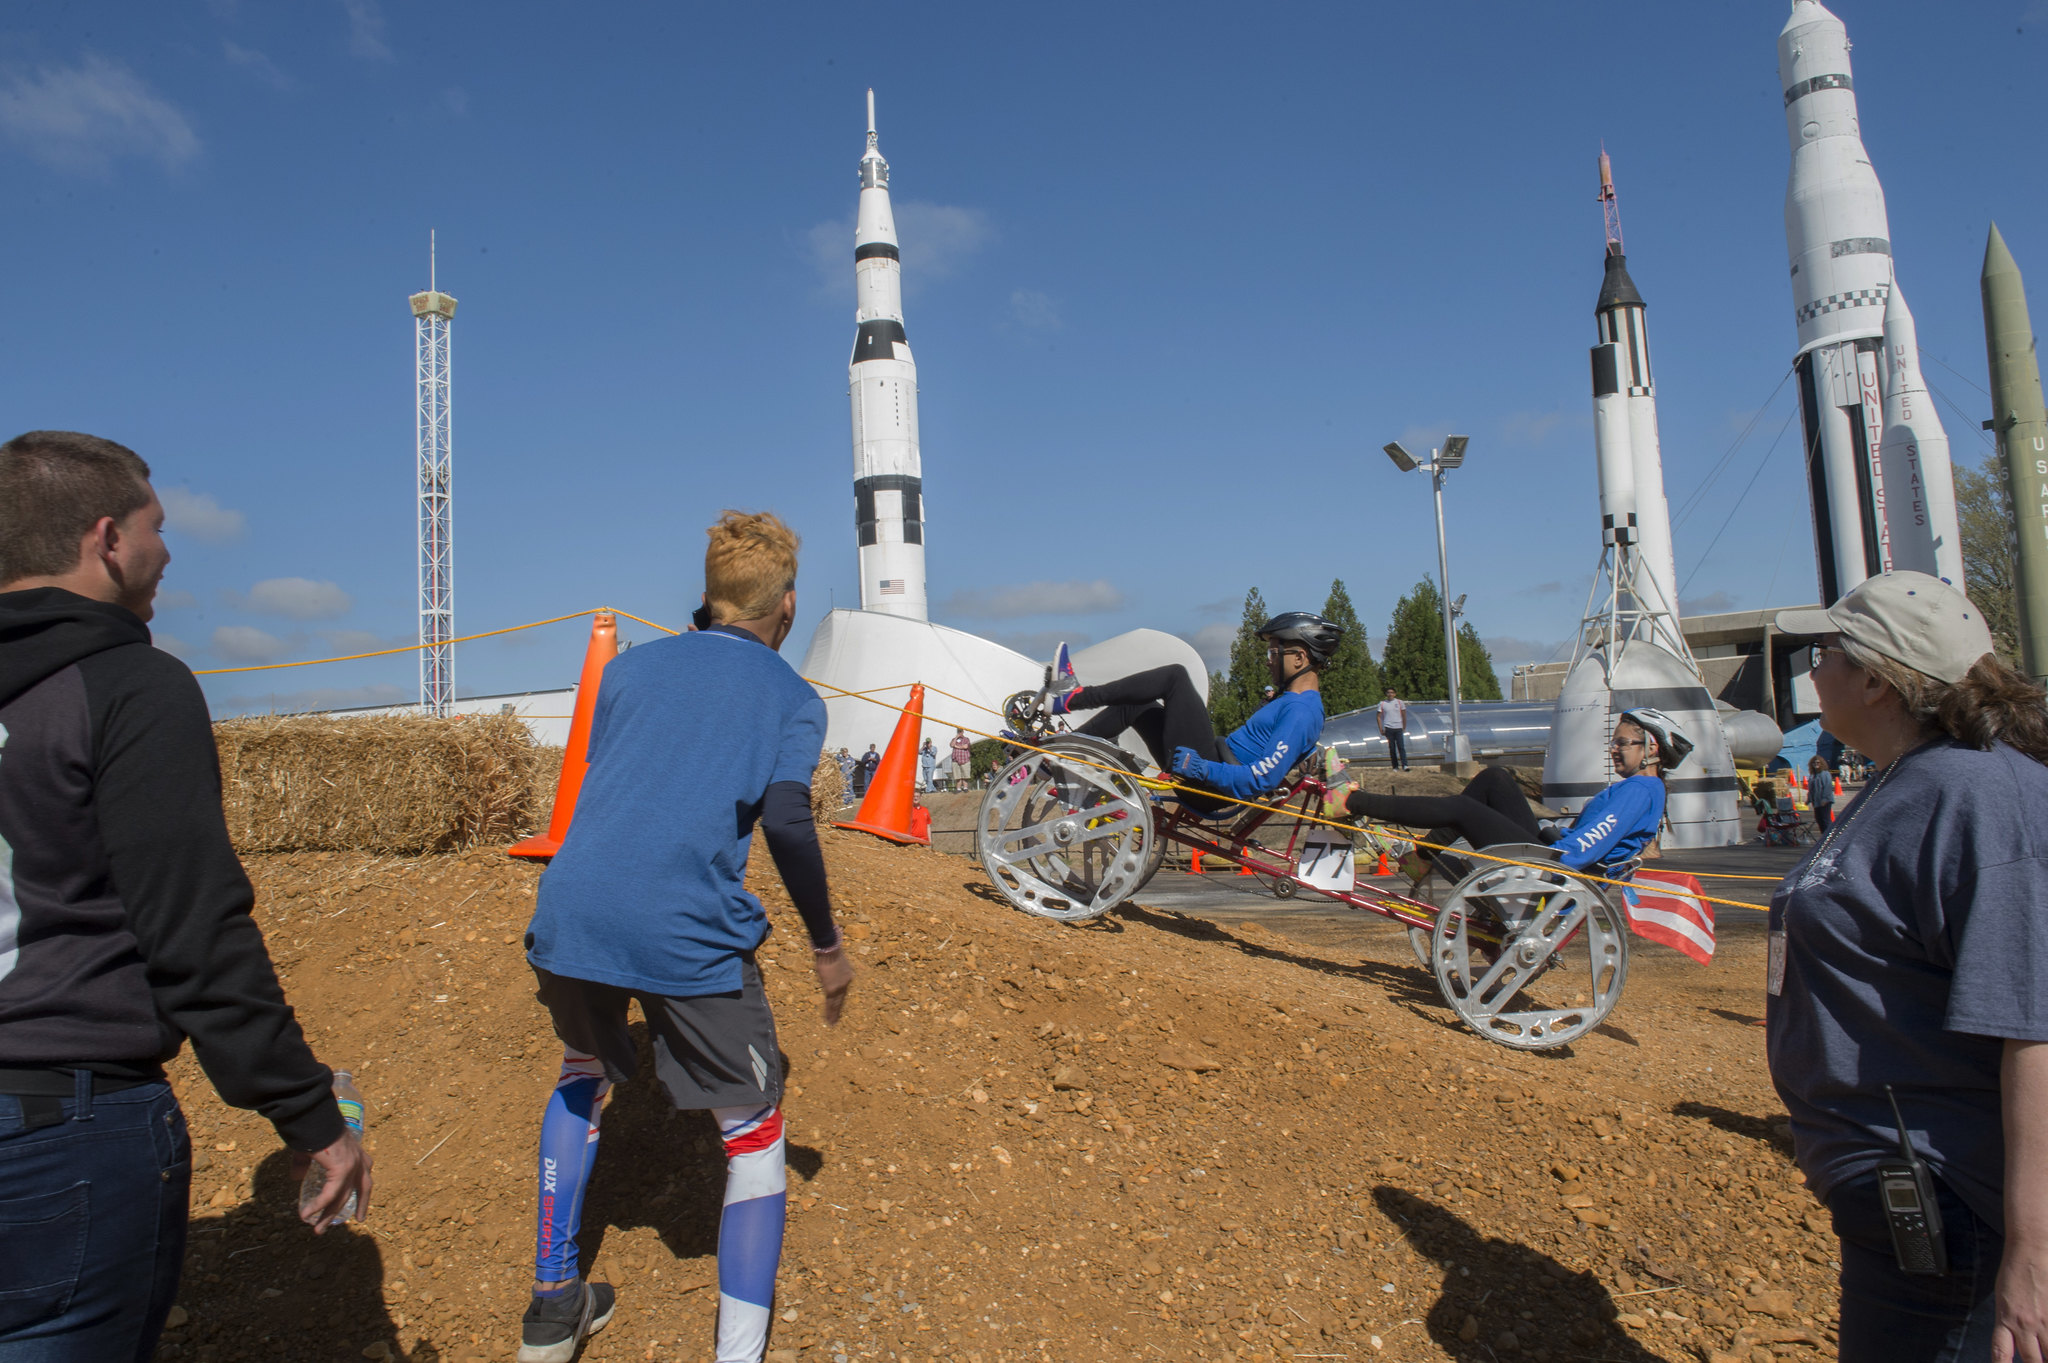 2 people on a human-powered rover with rockets in background